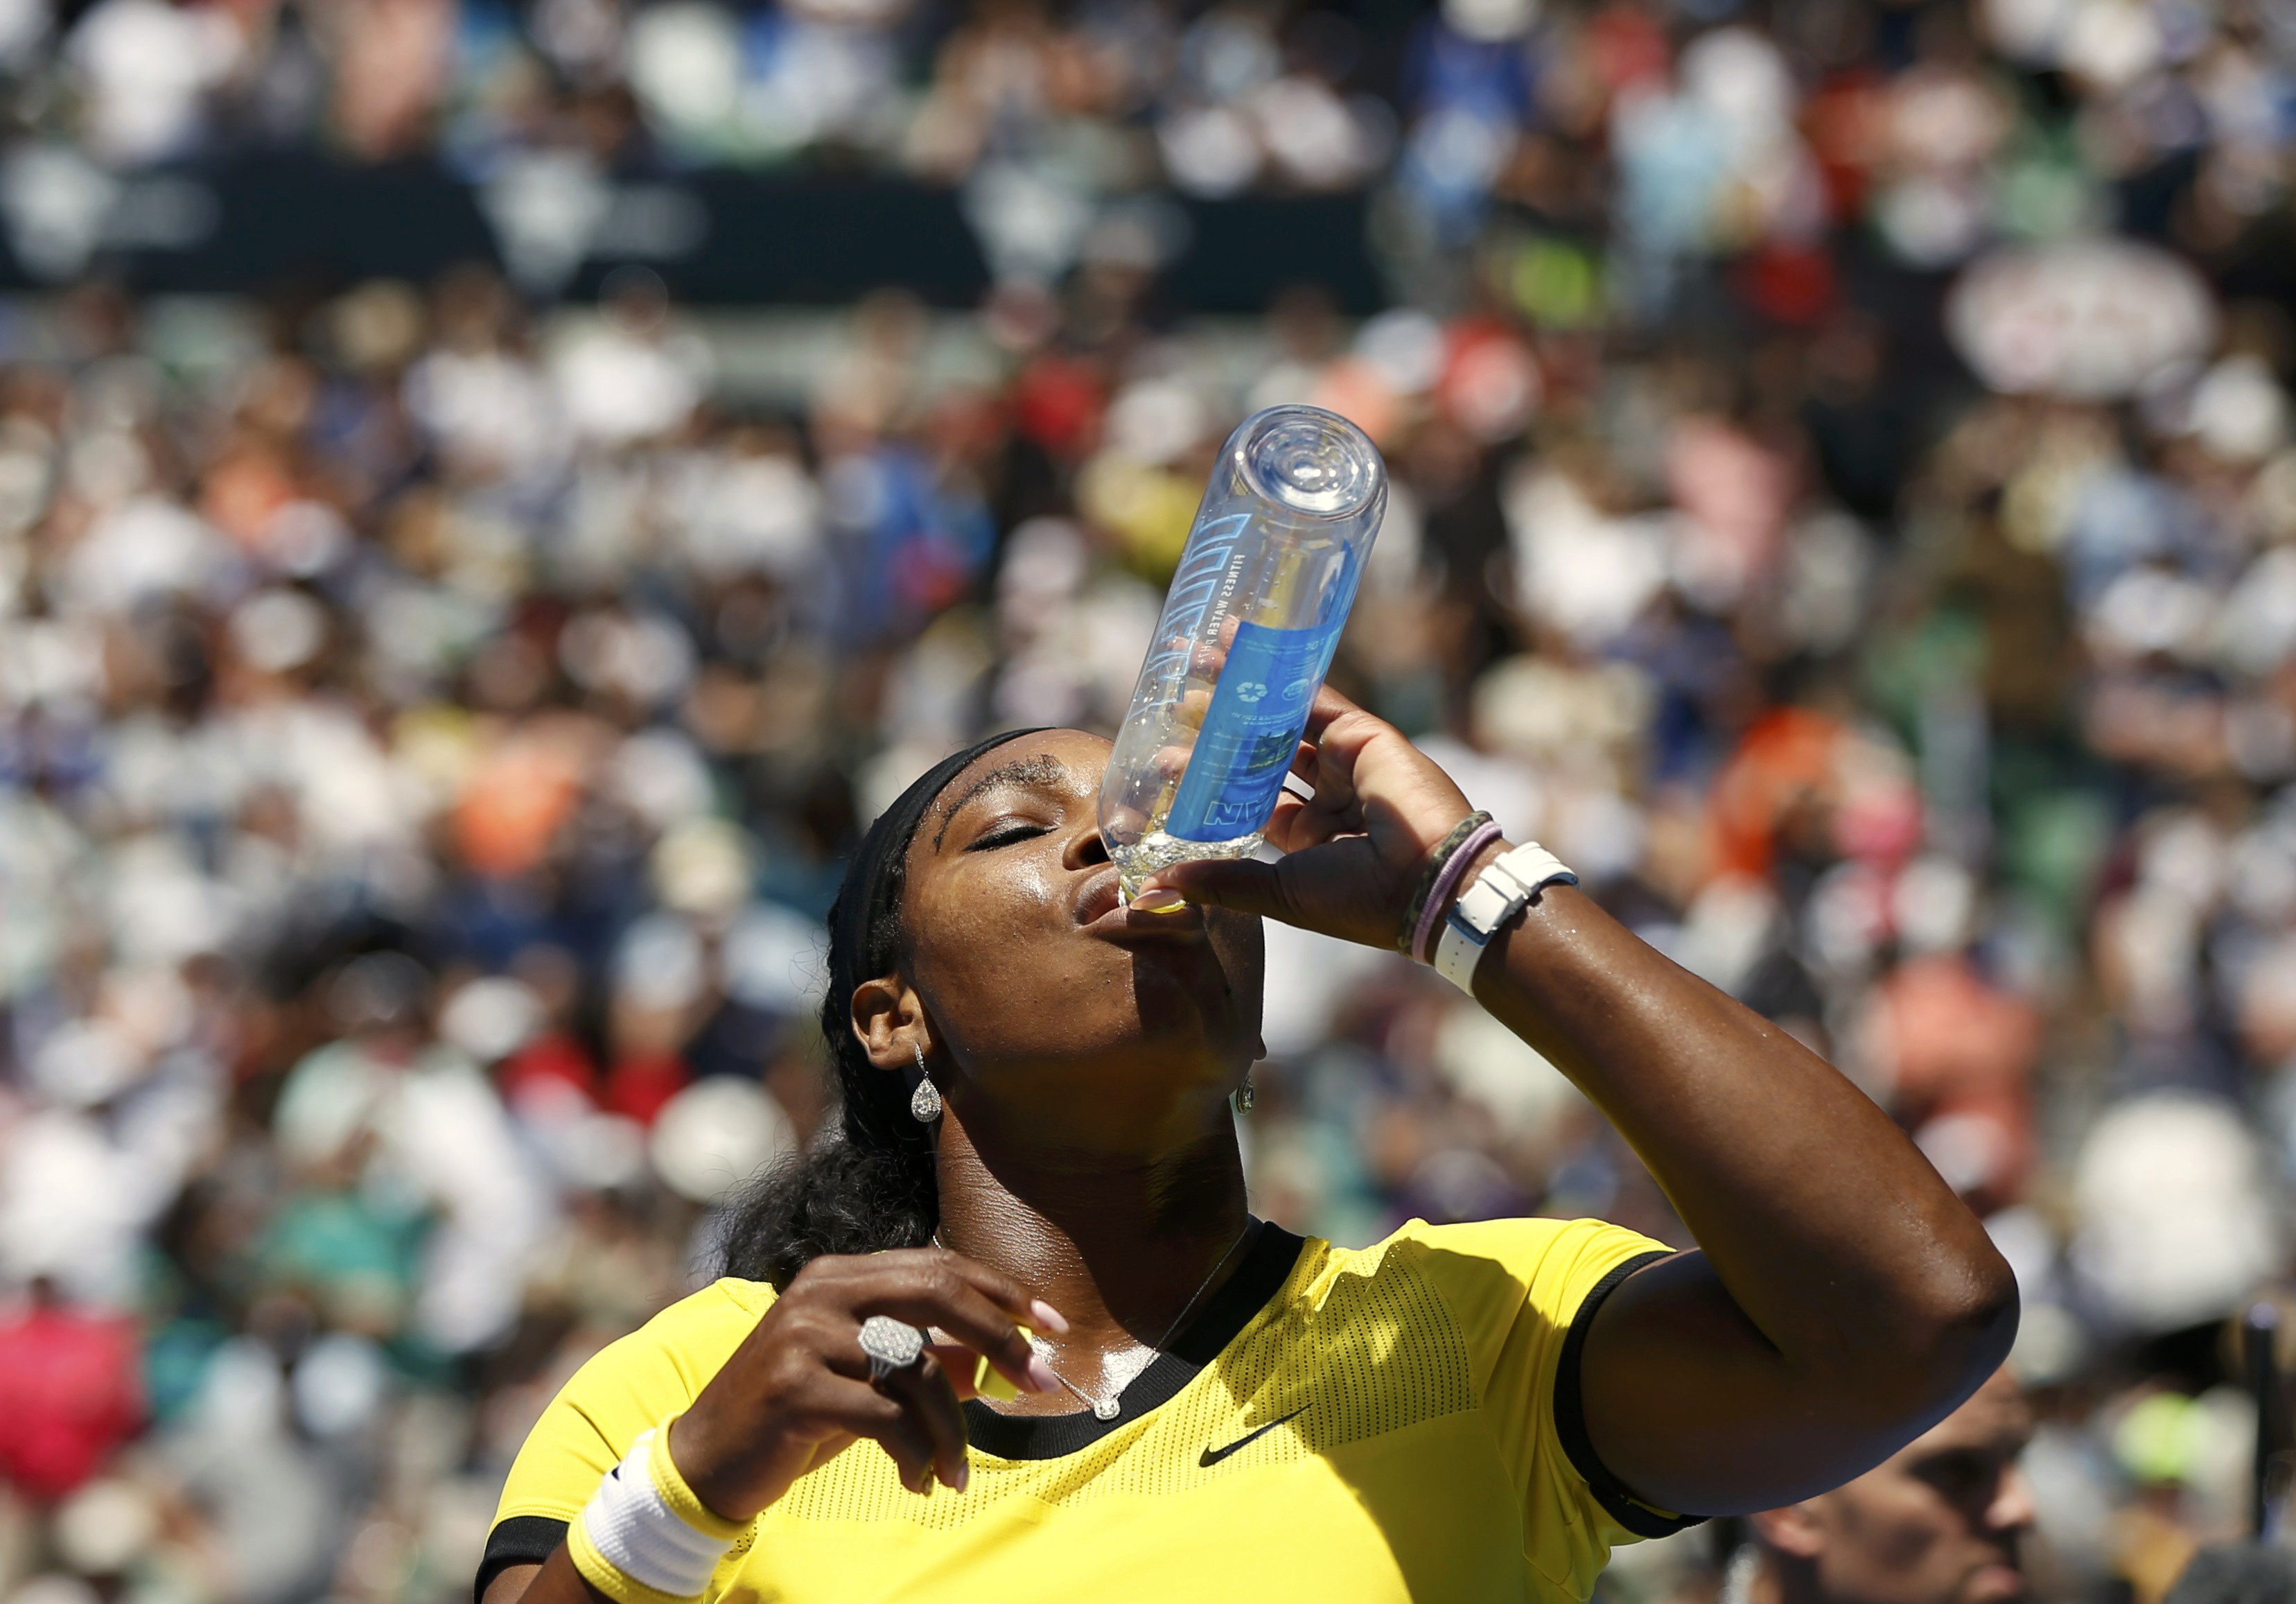 Williams of the U.S. takes a drink after winning her fourth round match against Russia's Gasparyan at the Australian Open tennis tournament at Melbourne Park